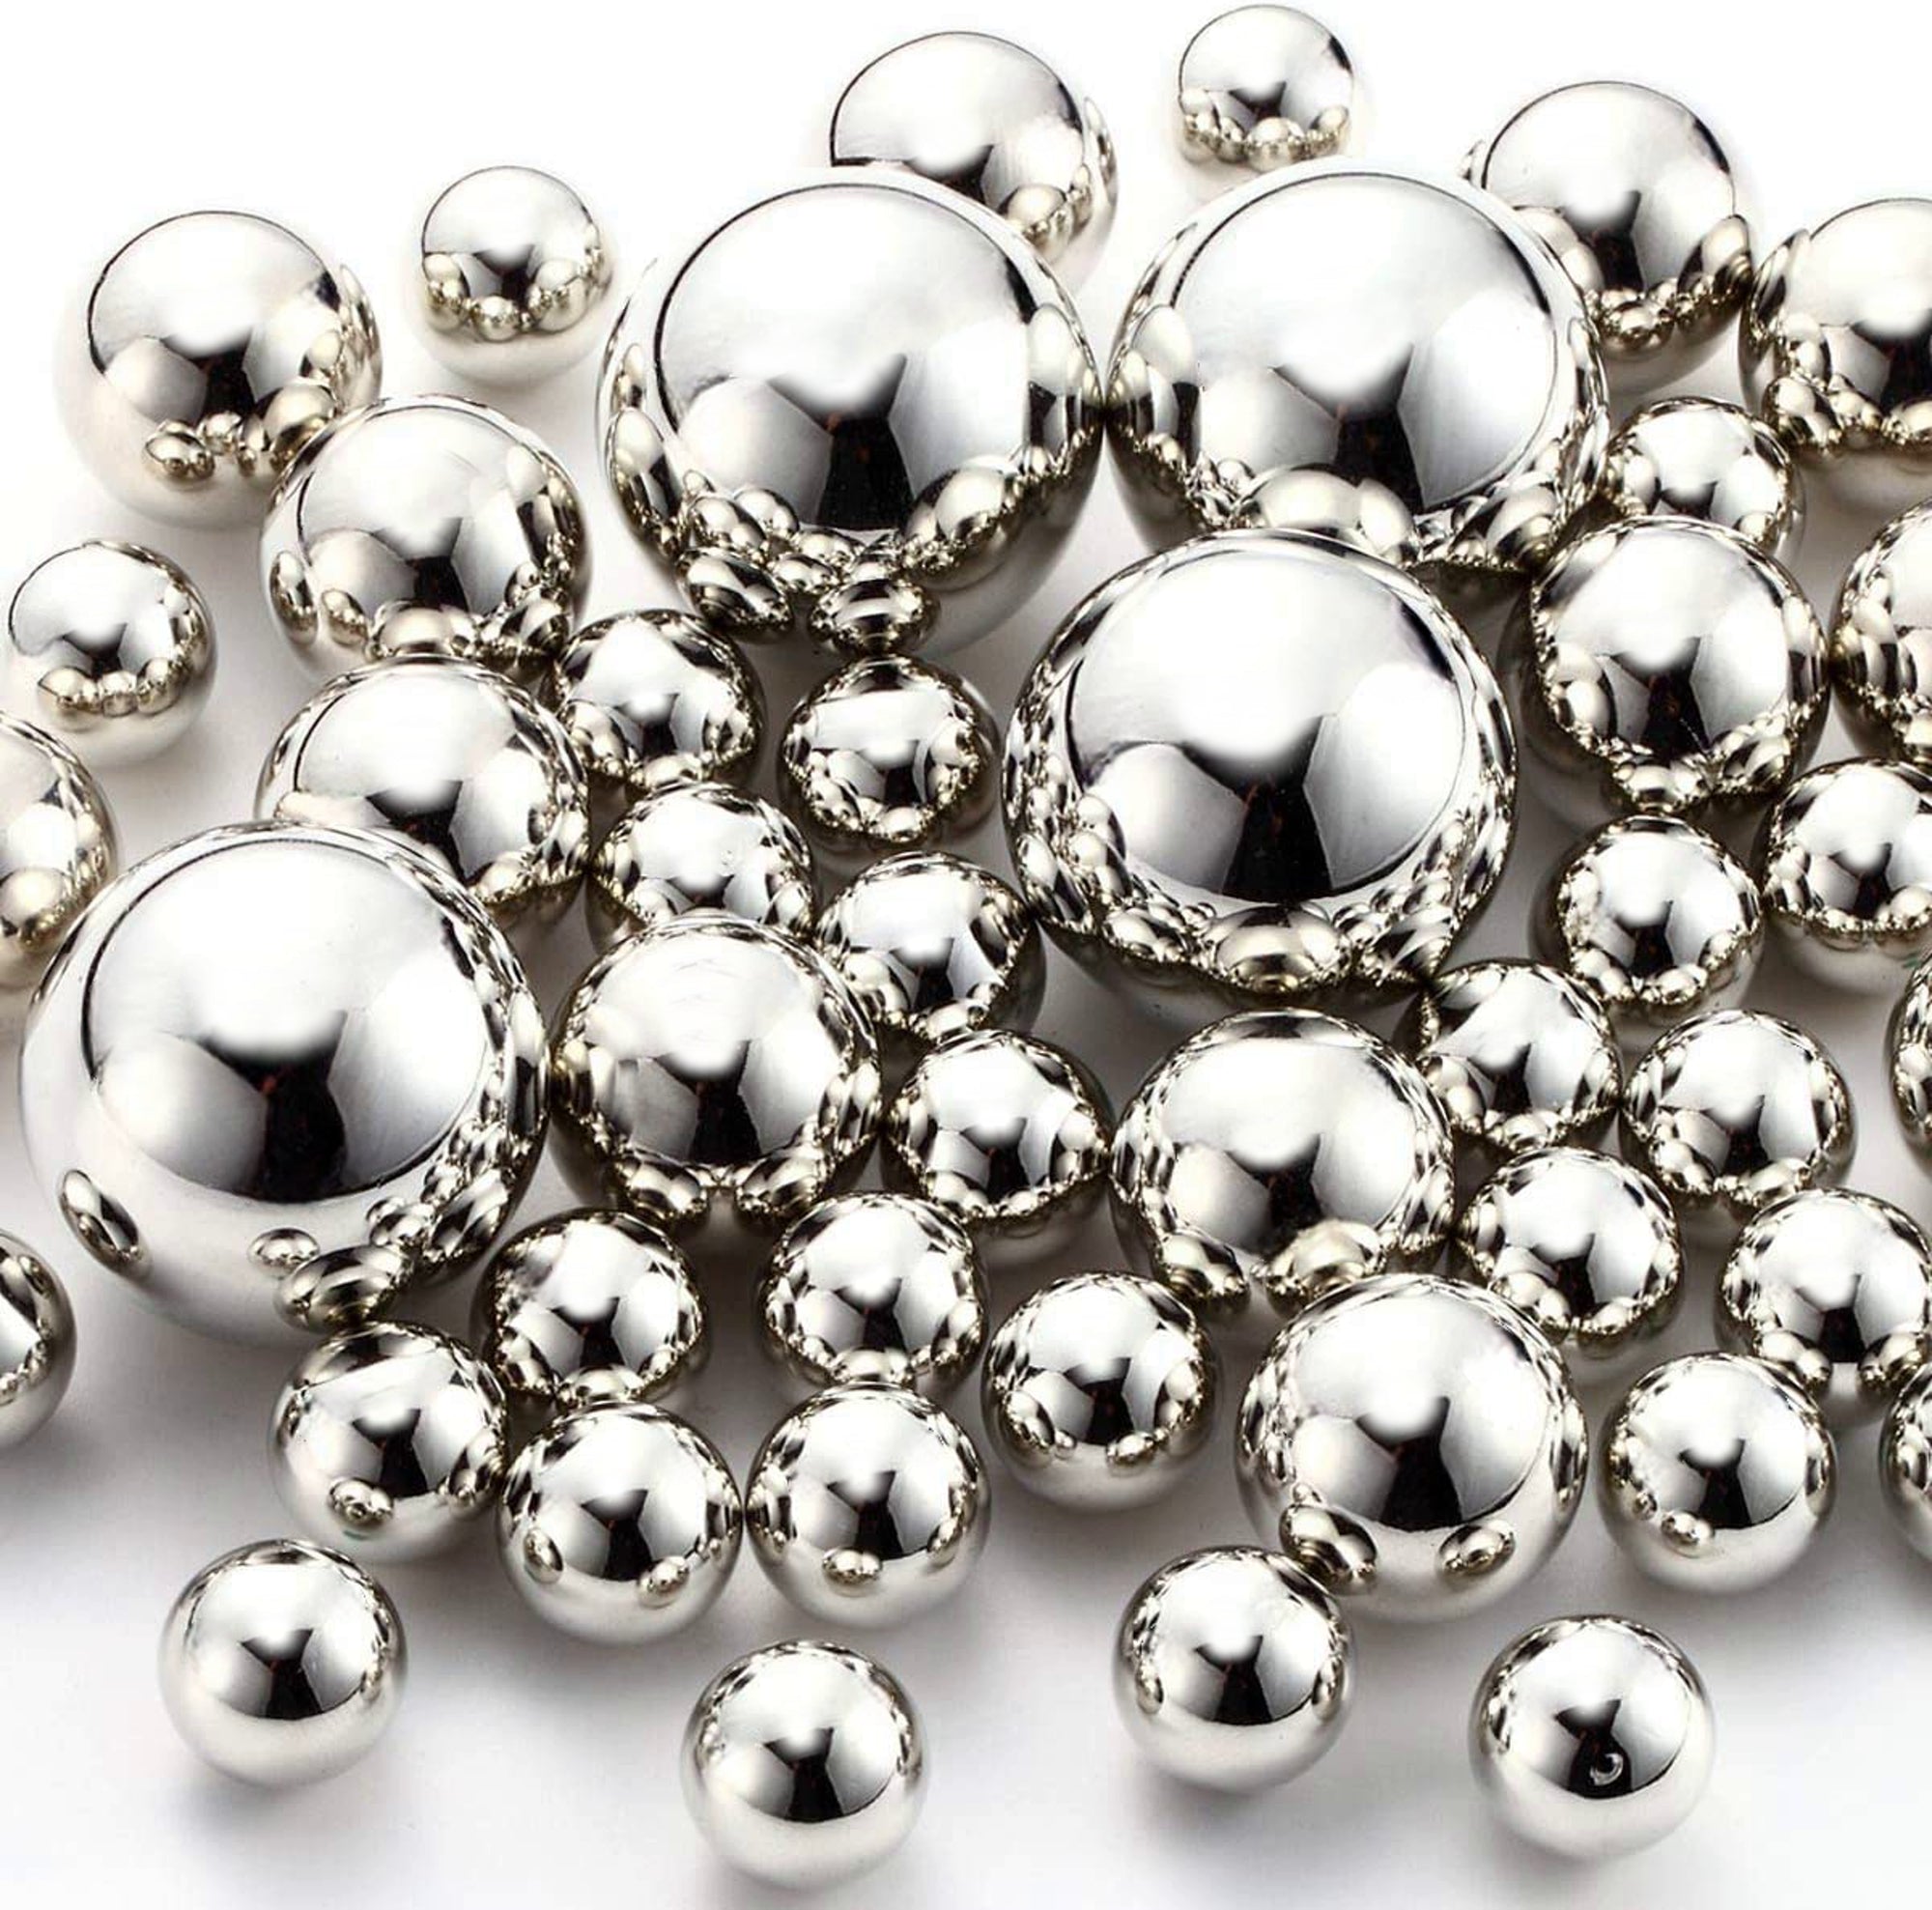  Floating Black Pearls-Shiny-Jumbo Sizes-Fills 1 Gallon of Gels  for The Floating Effect-with Exclusive Meaured Prep Kit-No Guessing-Perfect  Results! Vase Decorations : Home & Kitchen